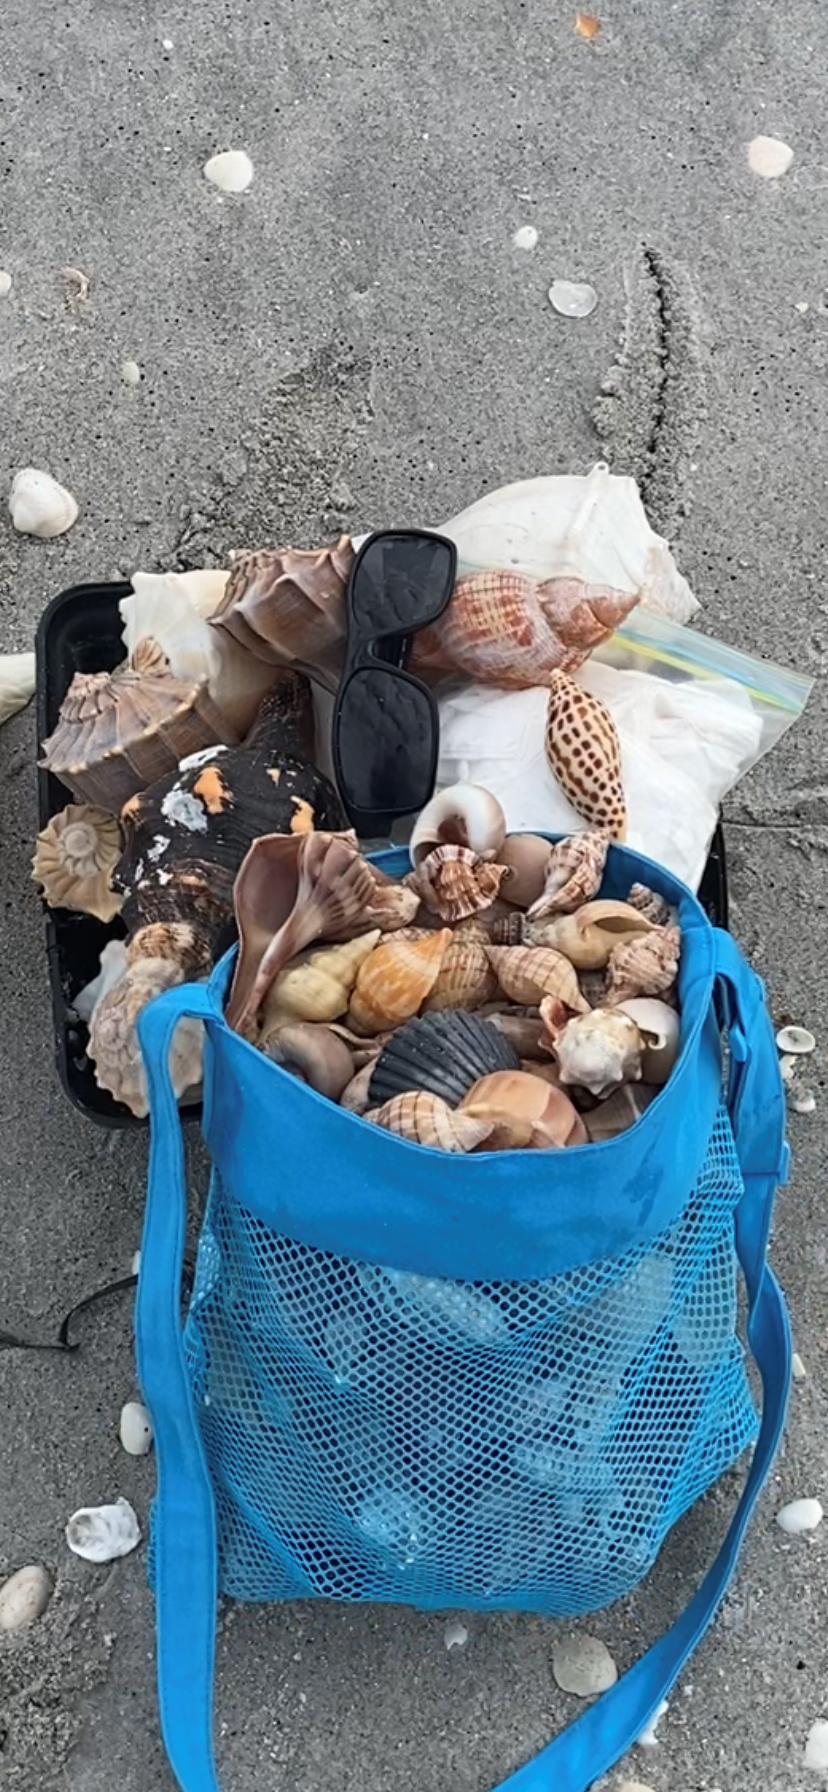 Here is the shells Johnnie Ennis found the day he finally added a rare junonia shell to his collection. The junonia is on white cloth at the top of the blue bag.